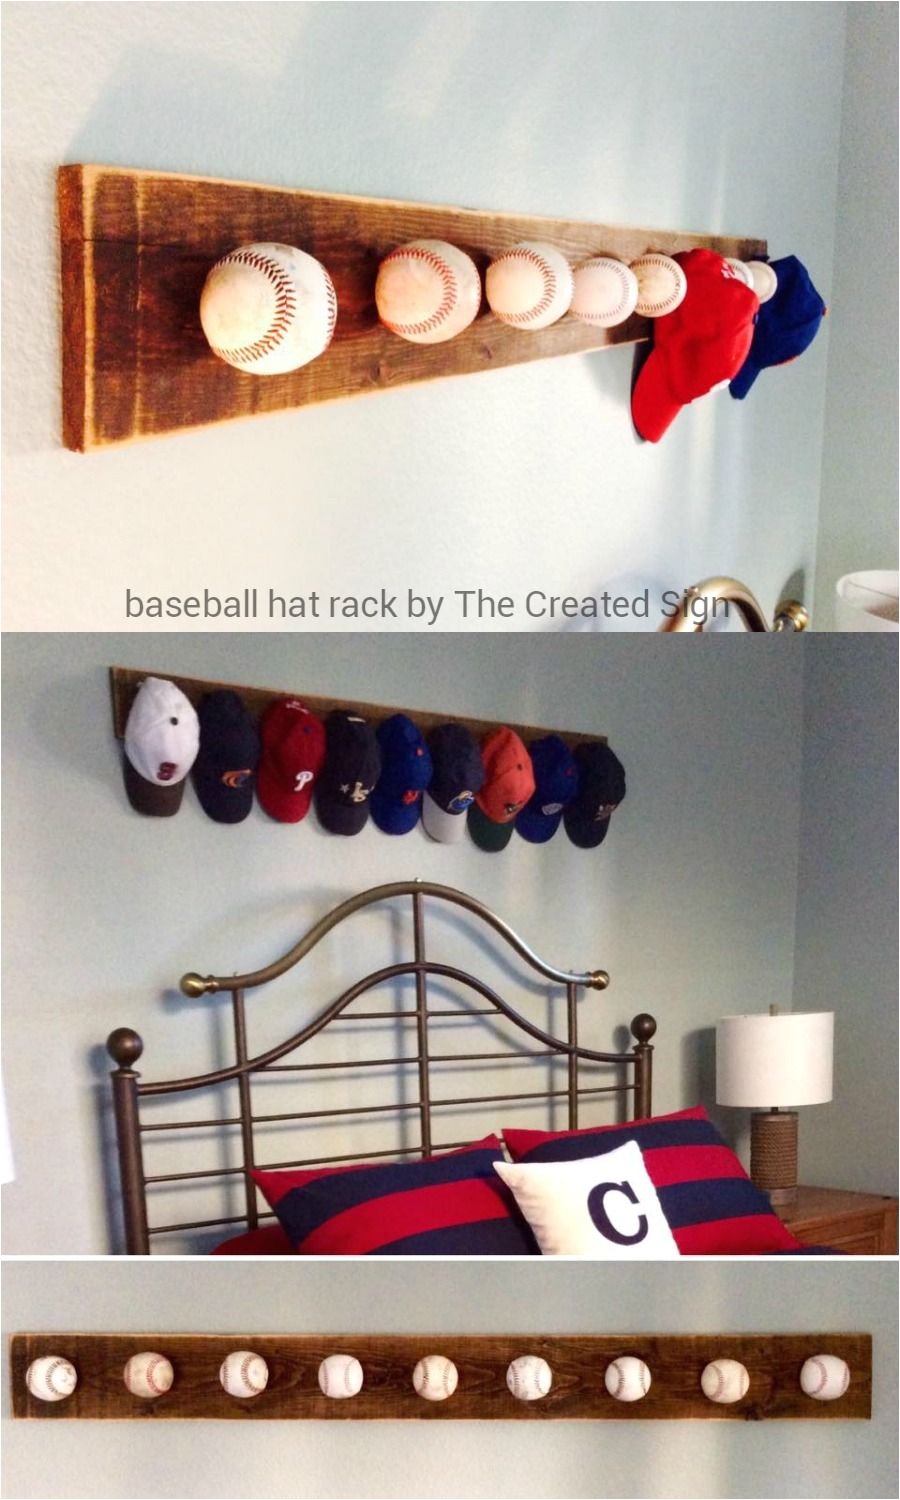 baseball hat rack using game balls by the created sign featured on remodelaholic